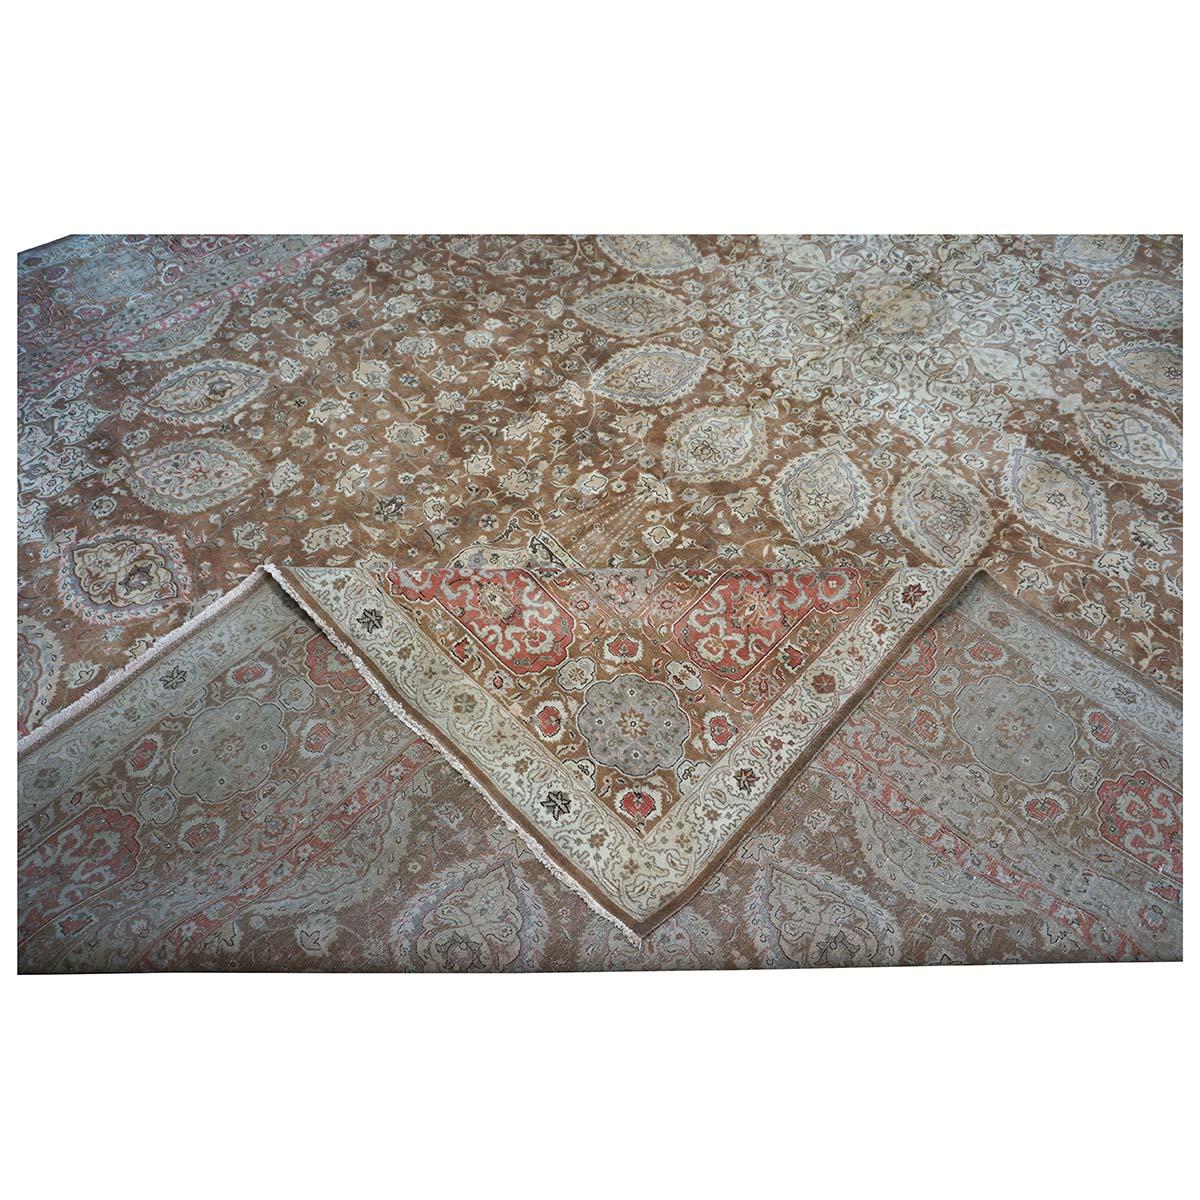 Antique 1930s Persian Tabriz 13x20 Brown & Salmon Oversized Handmade Area Rug For Sale 12